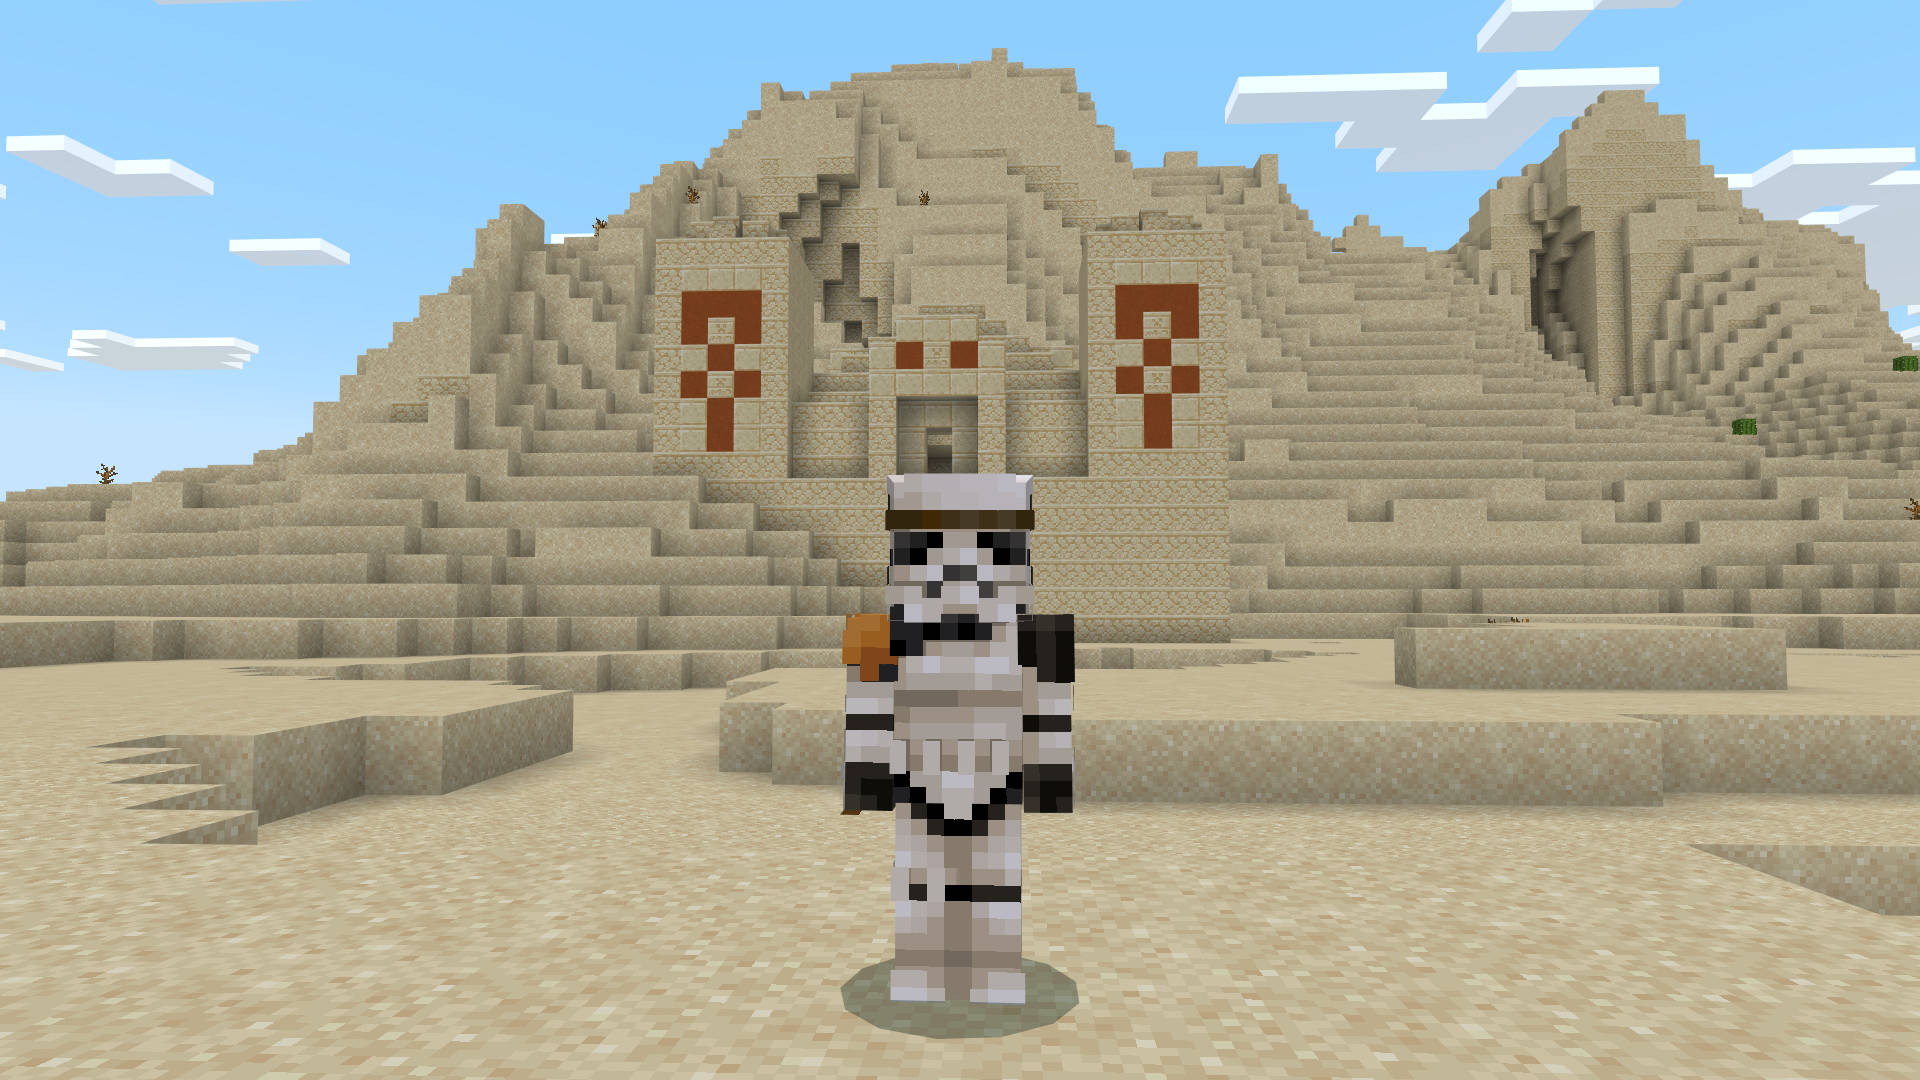 Best Minecraft skins: a Star Wars Stormtrooper standing guard outside of some desert ruins. He has not found the droids he is looking for.